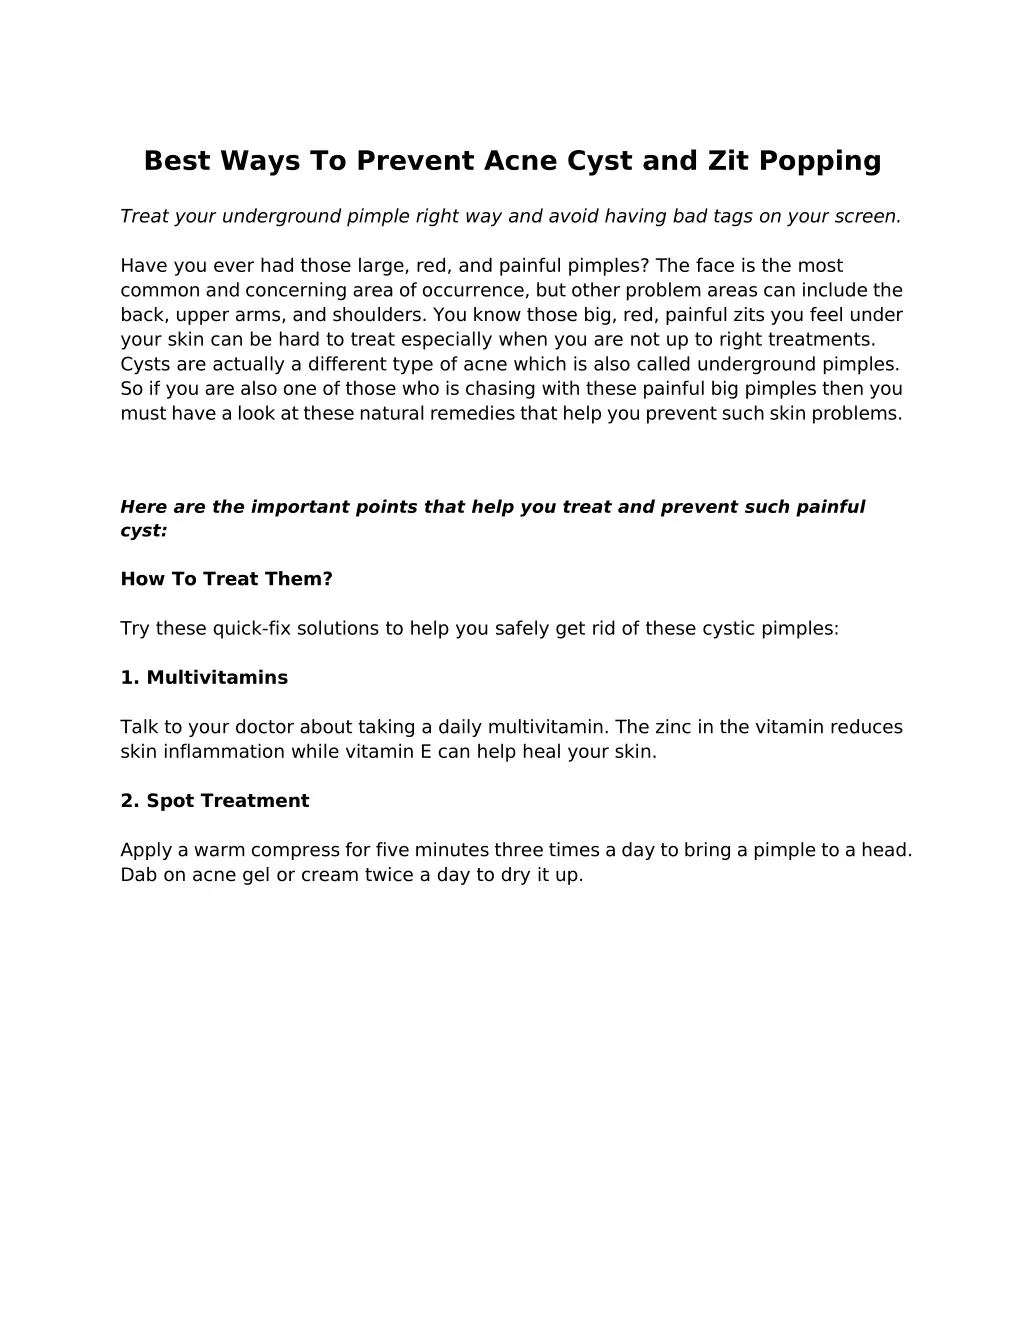 best ways to prevent acne cyst and zit popping